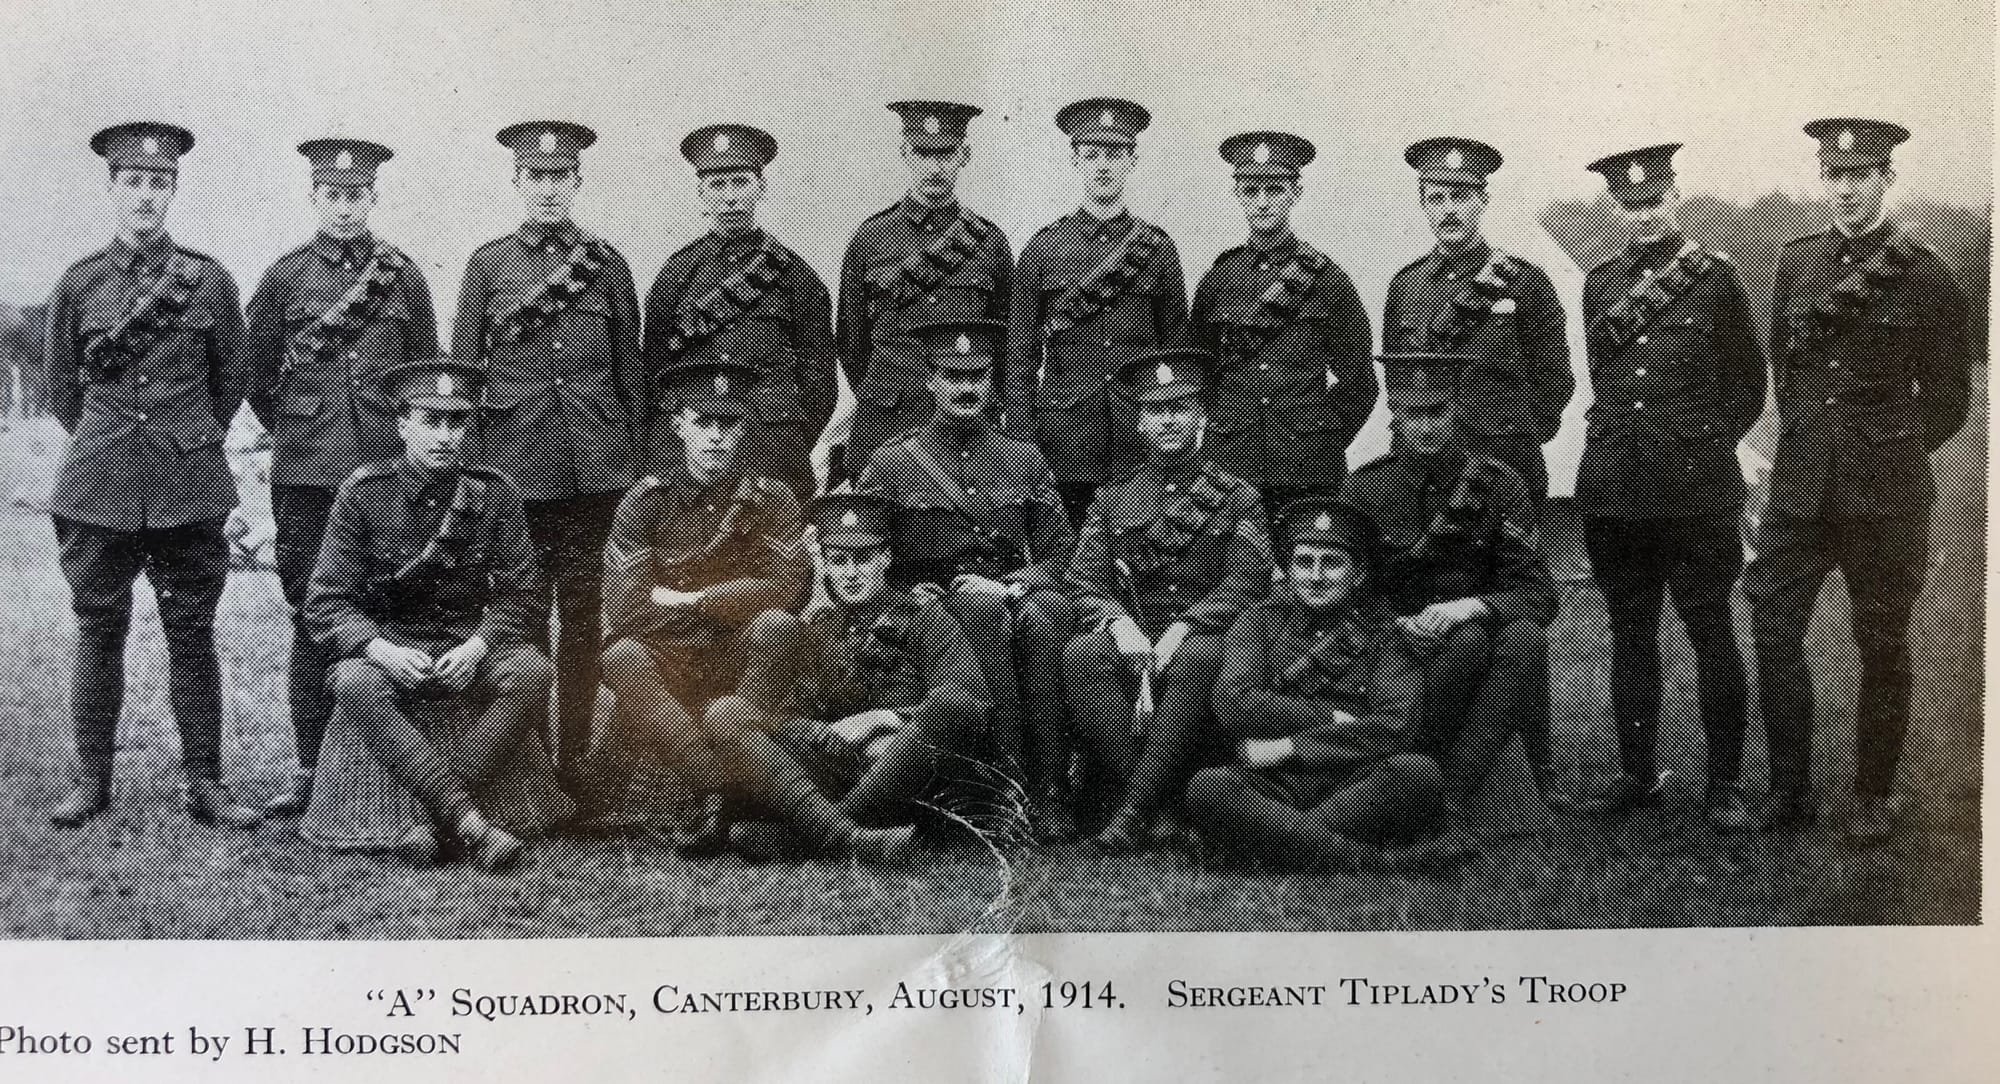 TIPLADY, G. H. Serjeant. 'Tiplady's Troop. 'A' Squadron. Right of centre front row next to the Officer.